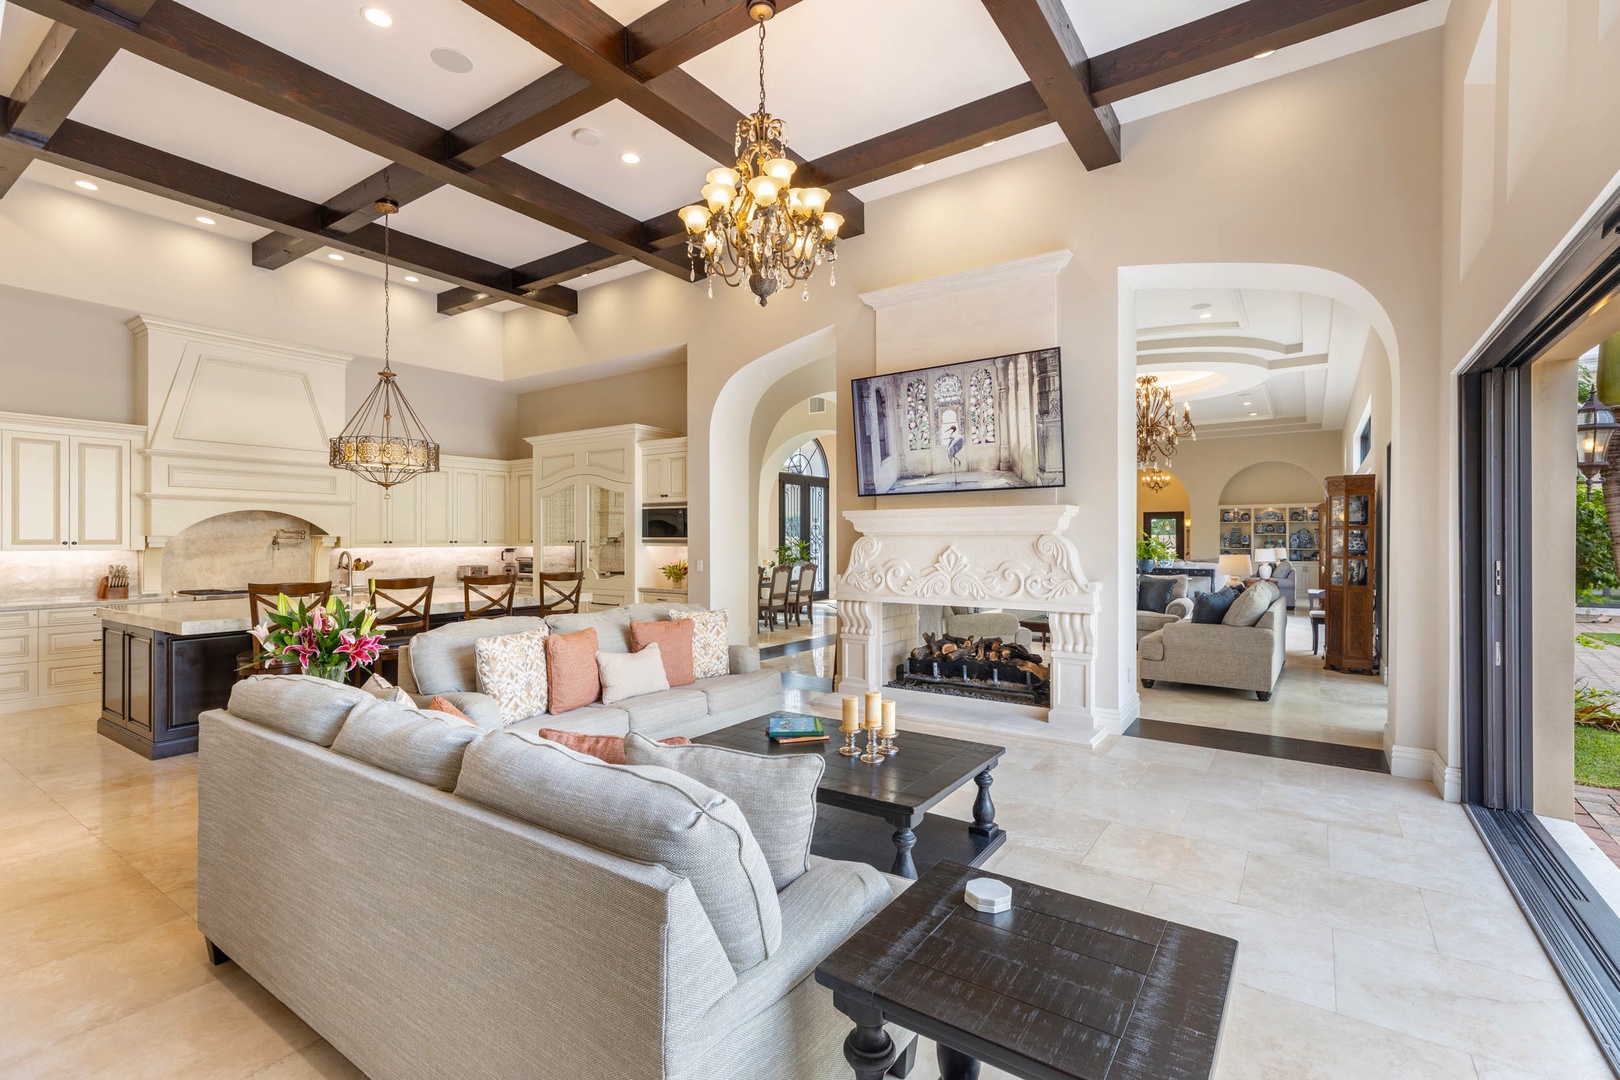 Honolulu Vacation Rentals, Royal Kahala Estate - Elegant living space with high ceilings and sophisticated decor, ideal for comfort and style.